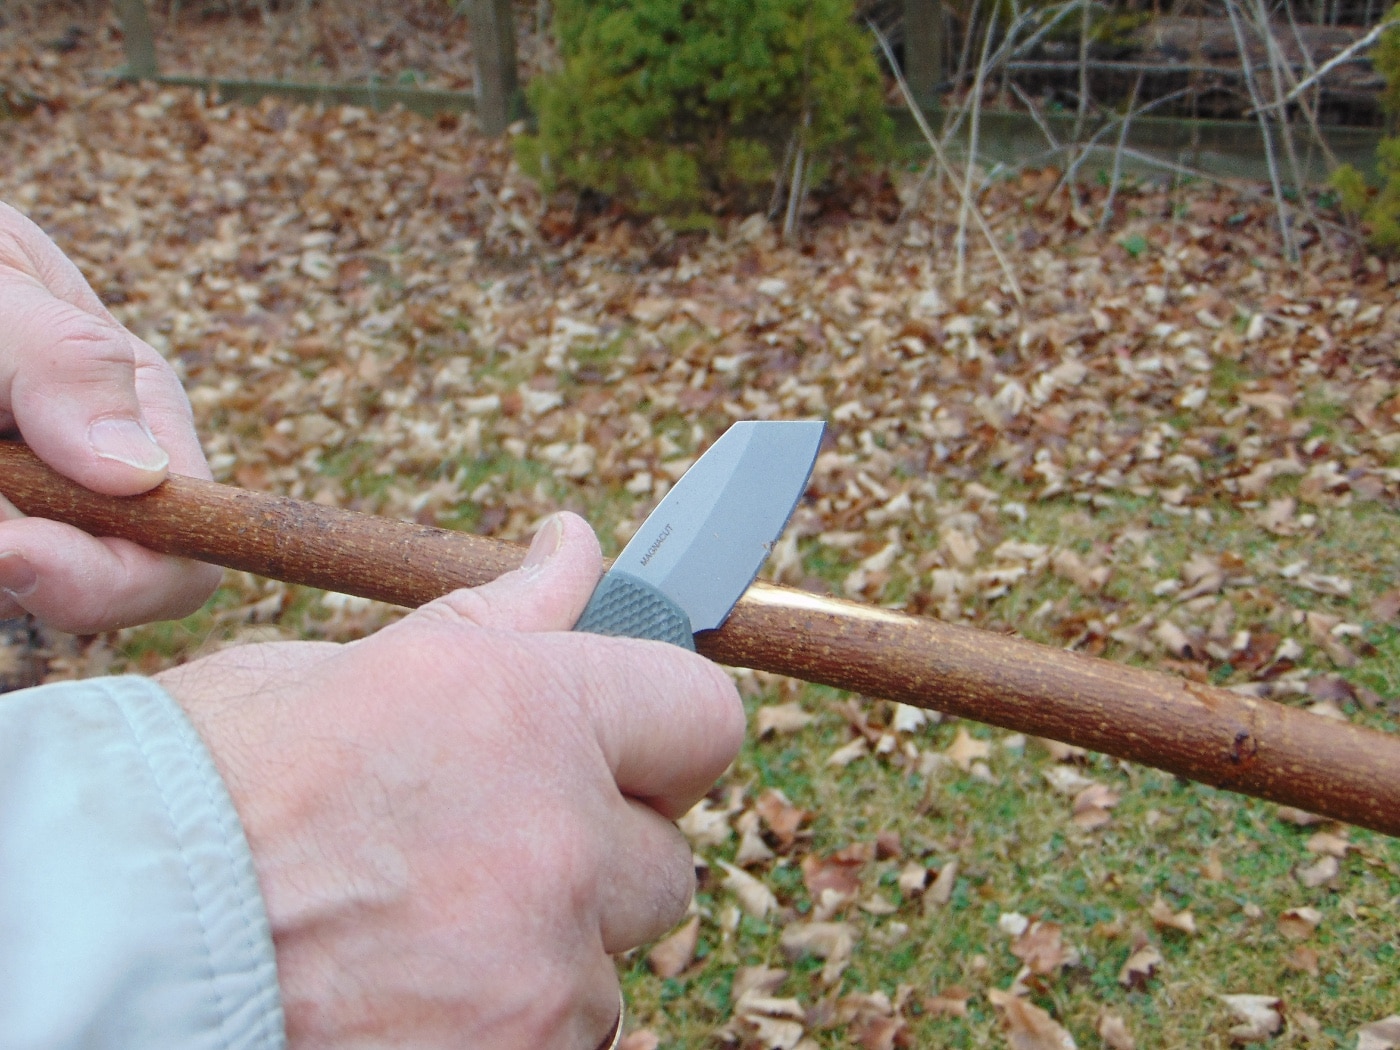 In this image, the author is skinning a sapling with the Runt 5 automatic knife. In his niche market, there are a lot of knives from companies like Benchmade, CRKT and Spyderco. Nevertheless, this automatic knife textured black model uses the latest magnacut steel as the newest take on their classic knife. The pocket-friendly auto comes with a CPM-20CV blade that's especially strong along the spine. Welcome to the blade club.